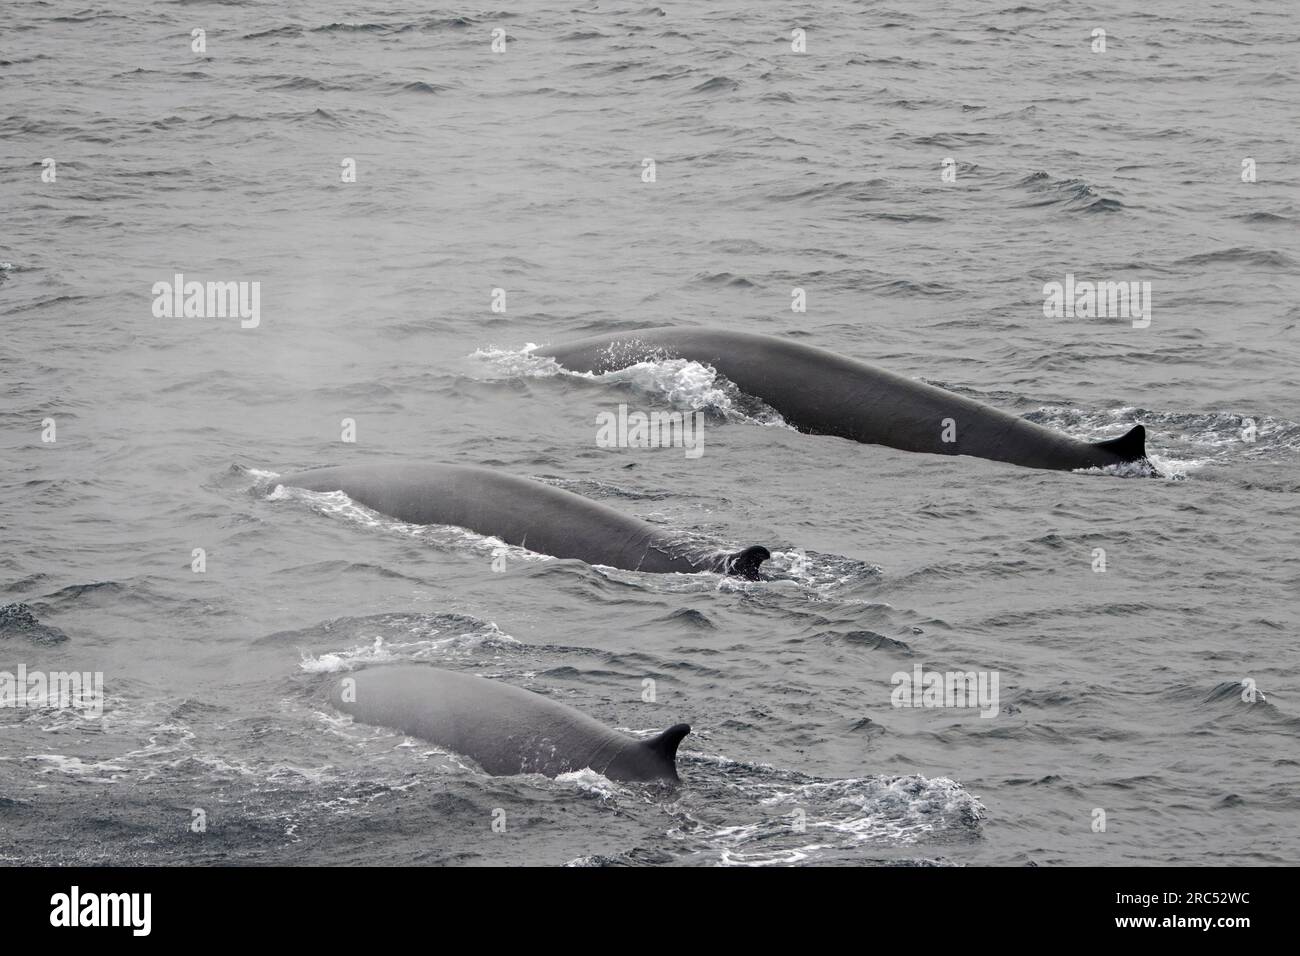 Three fin whales / finback whale pod / common rorquals (Balaenoptera physalus) surfacing in the Arctic ocean in summer, Svalbard / Spitsbergen Stock Photo